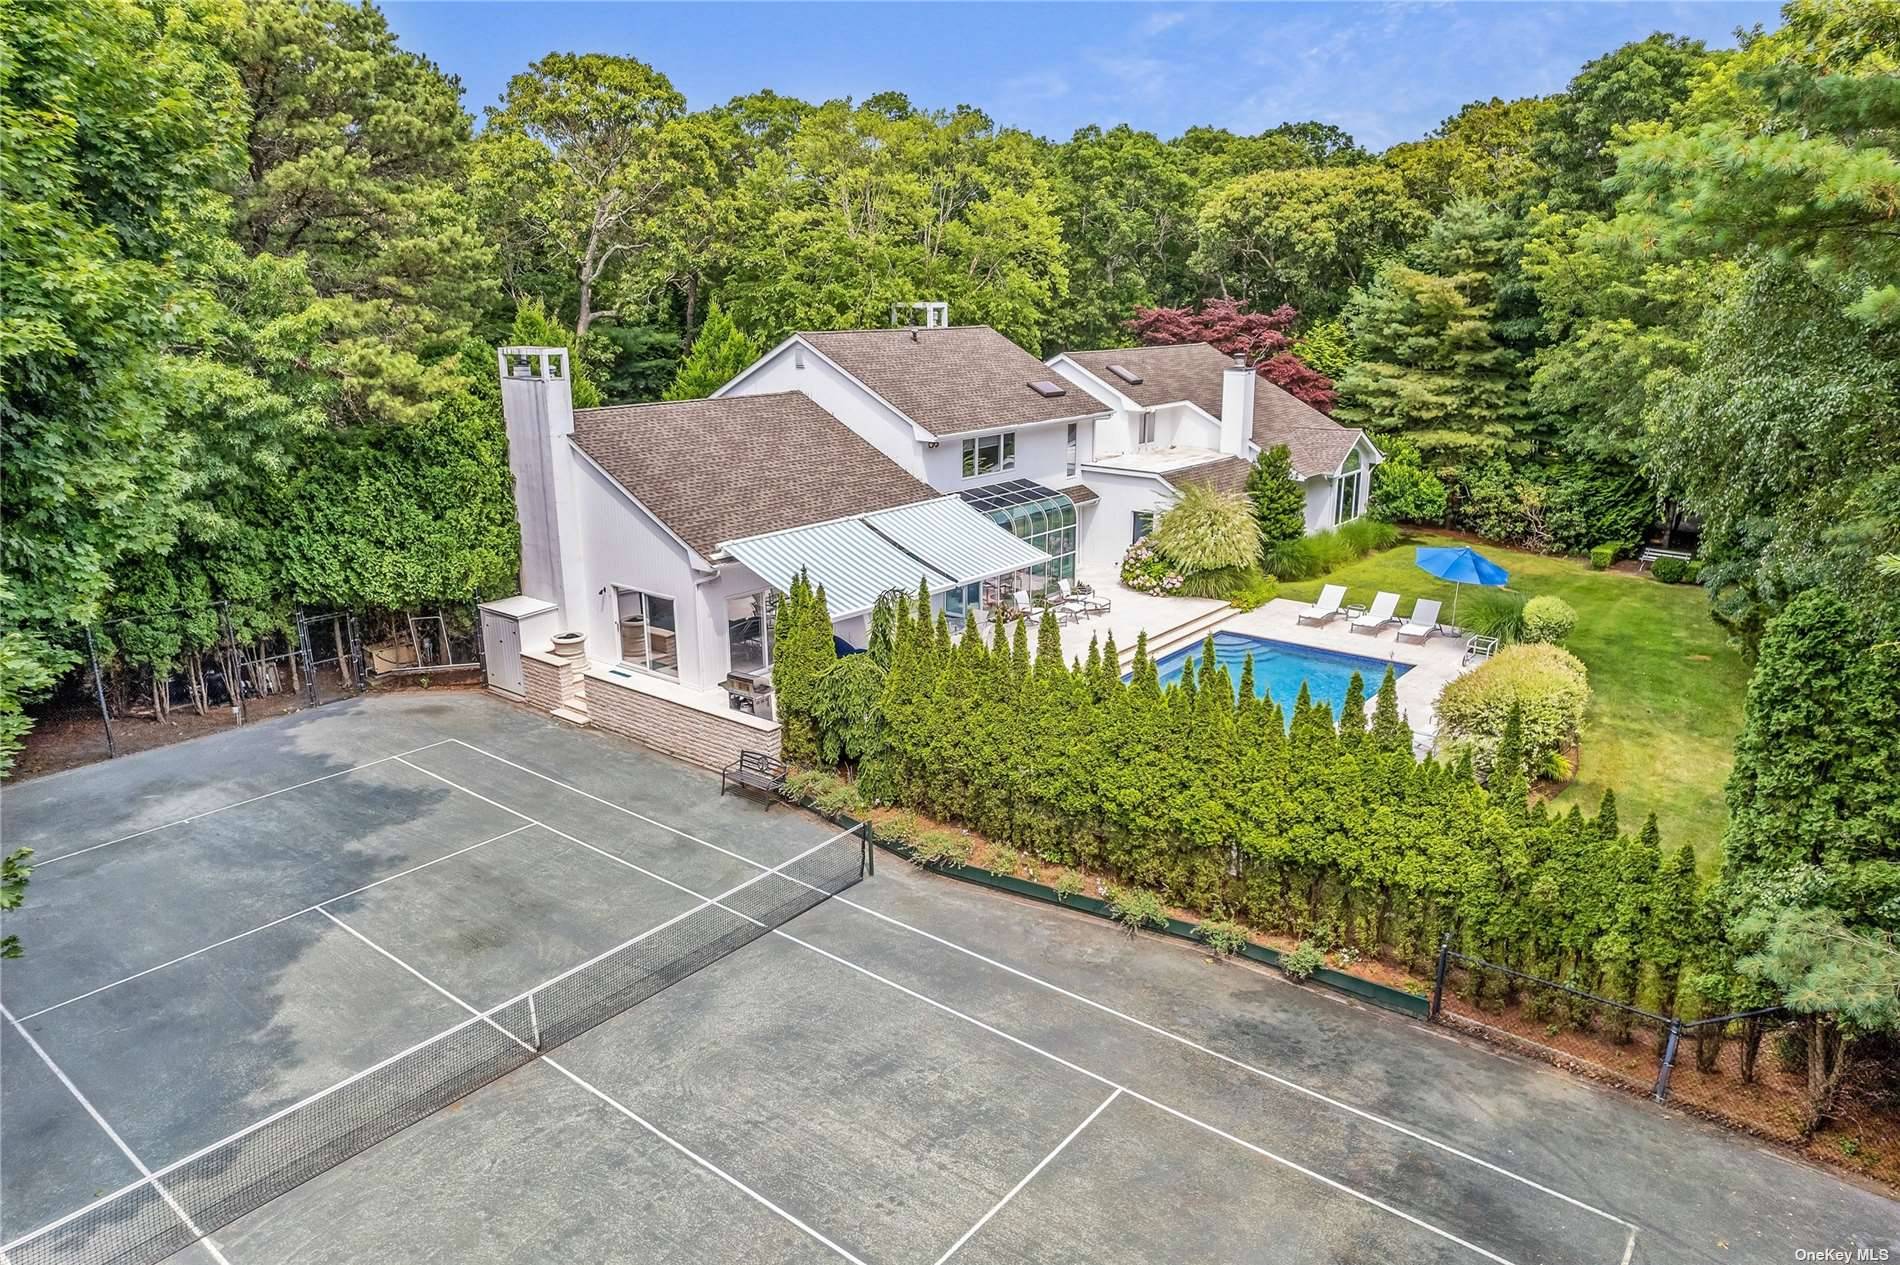 POOL AND TENNIS IN WESTHAMPTON Featuring 4 bedrooms, 5.